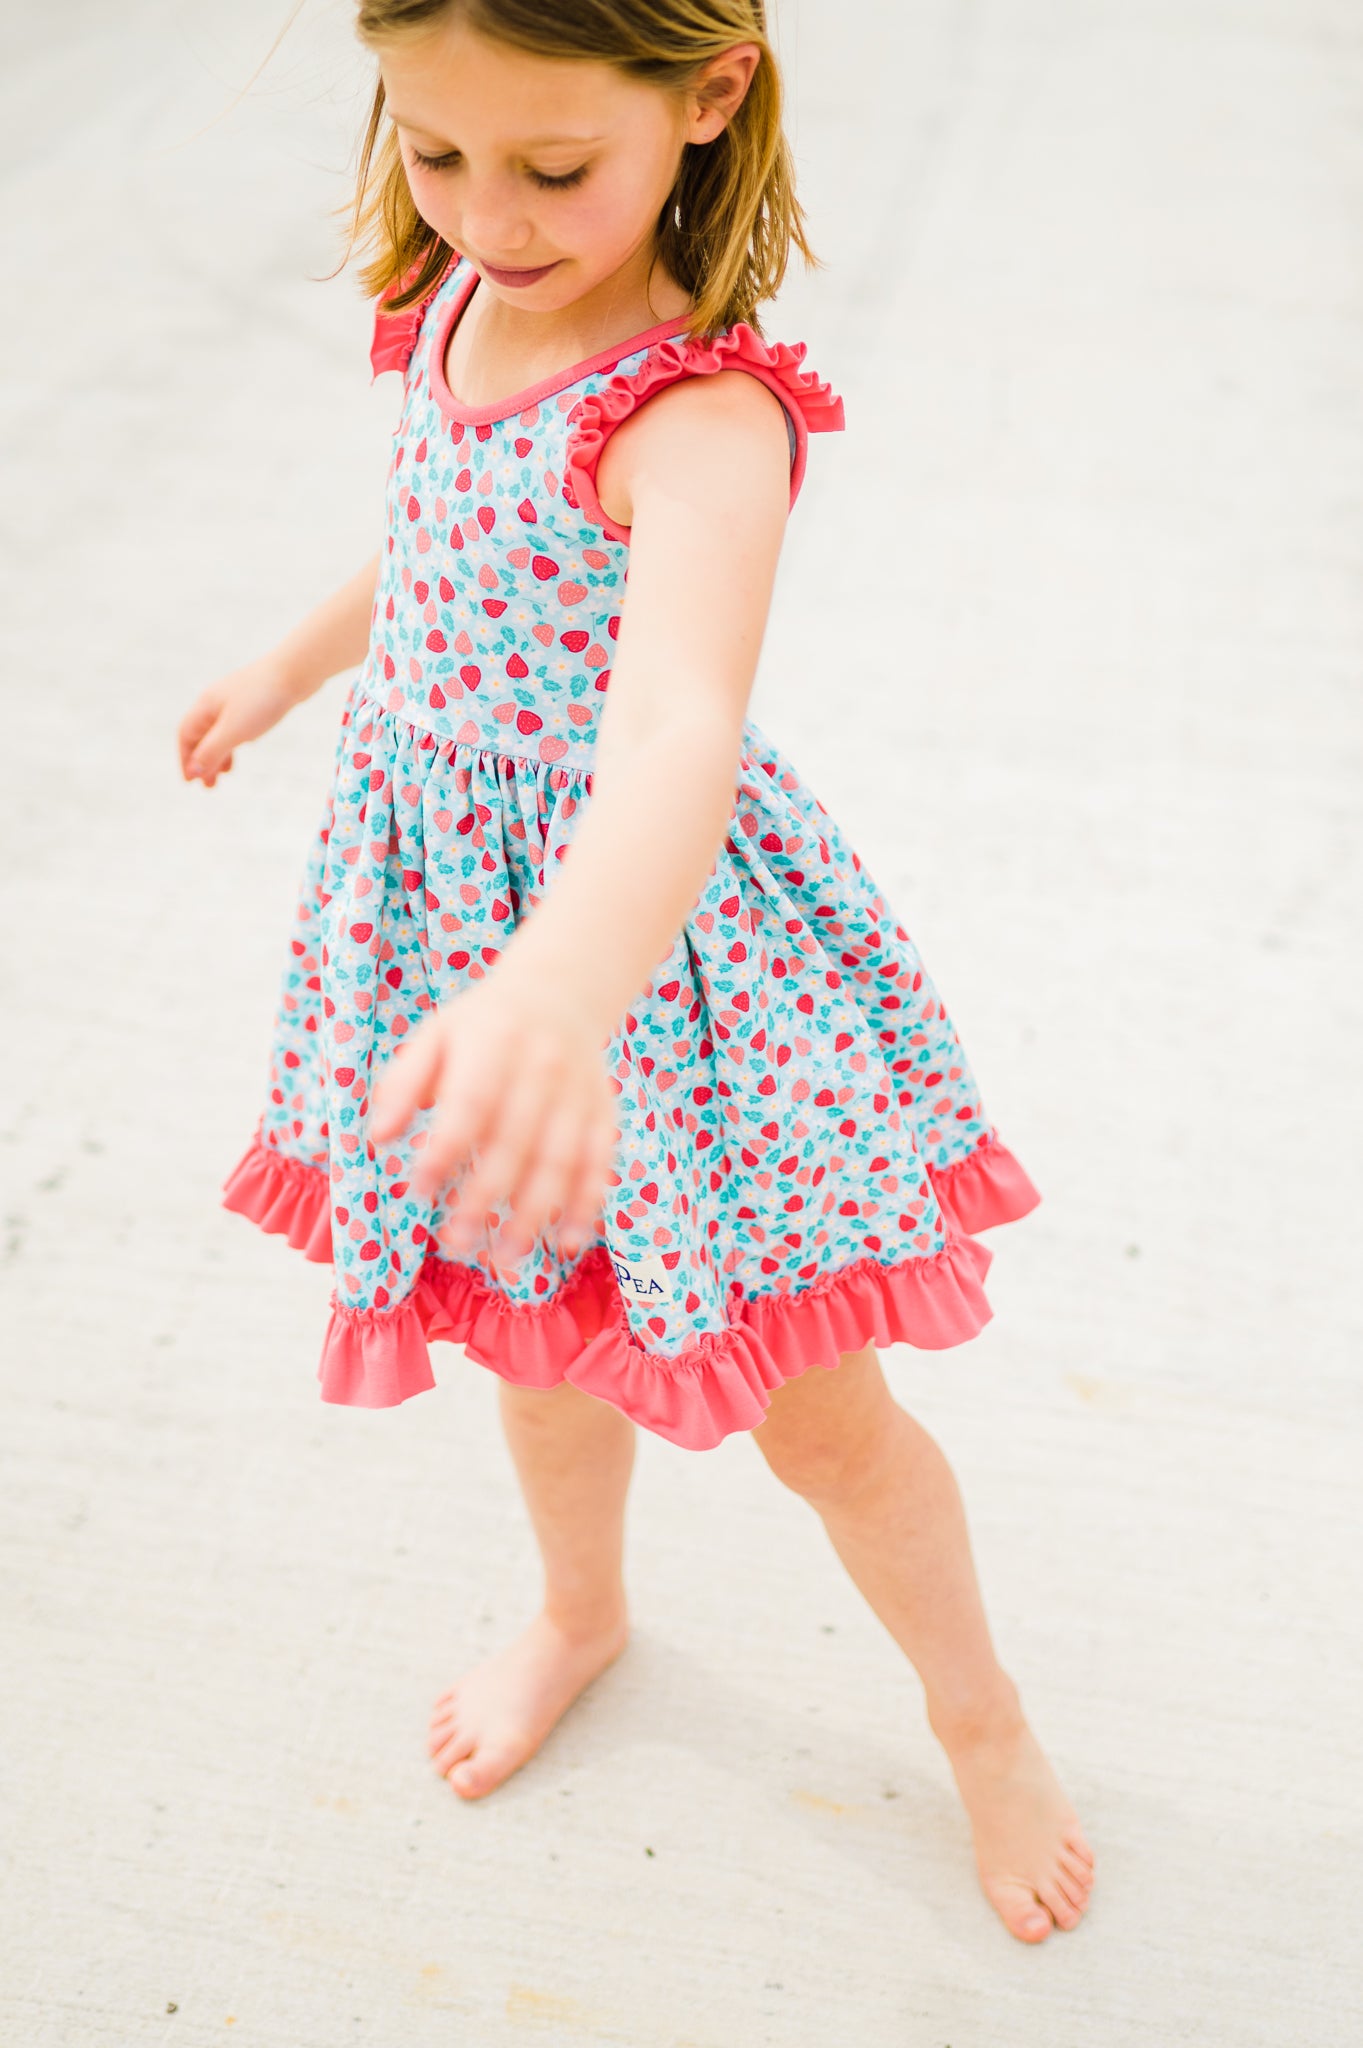 I love you 'Berry' Much Ruffled Hem Lap Dress (ships in 2 weeks)